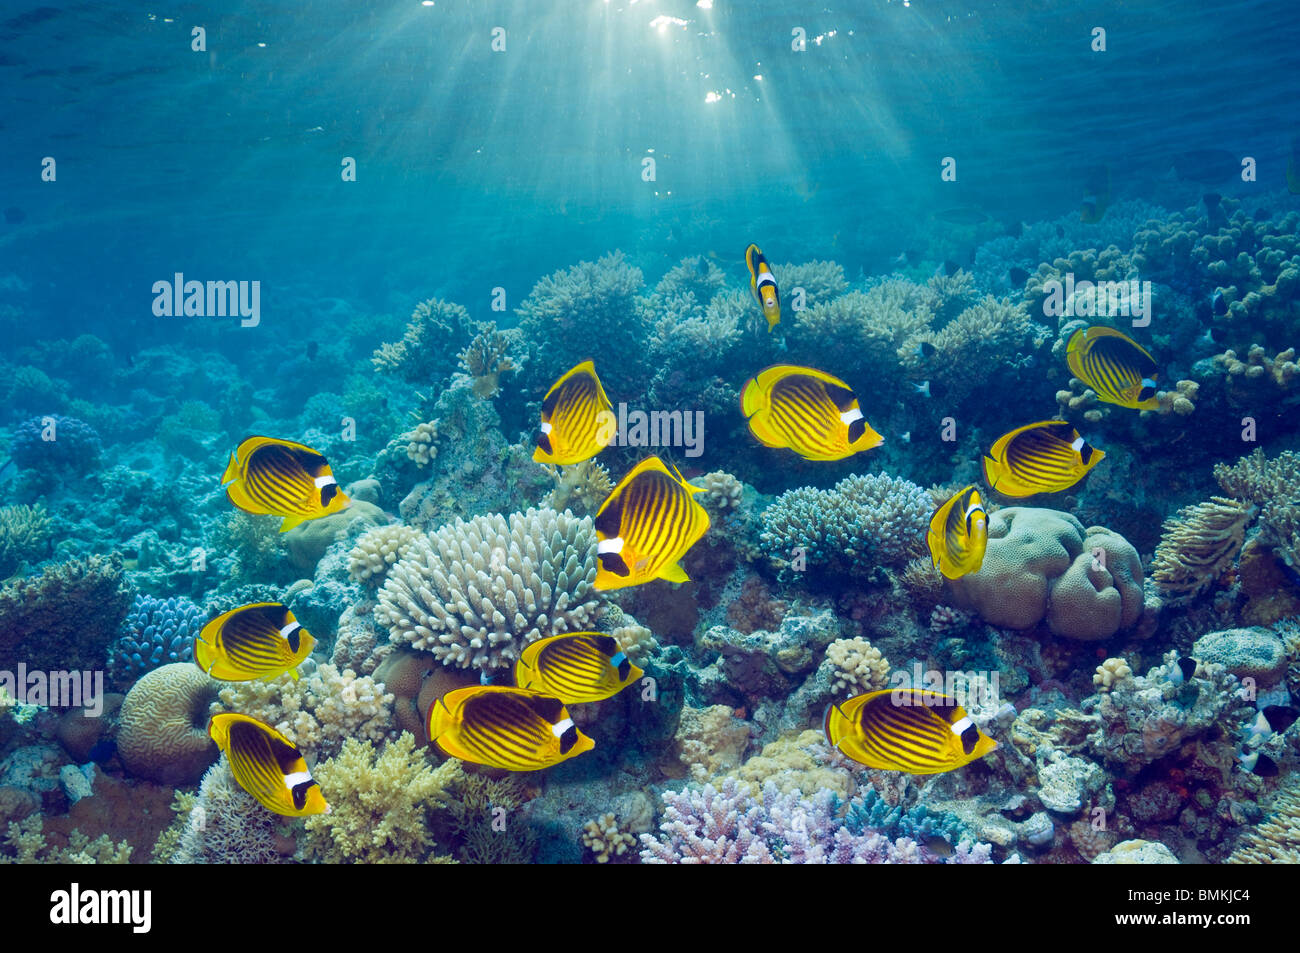 Red Sea racoon butterflyfish, swimming over coral reef in unusually large numbers.  Red Sea, Egypt. Stock Photo